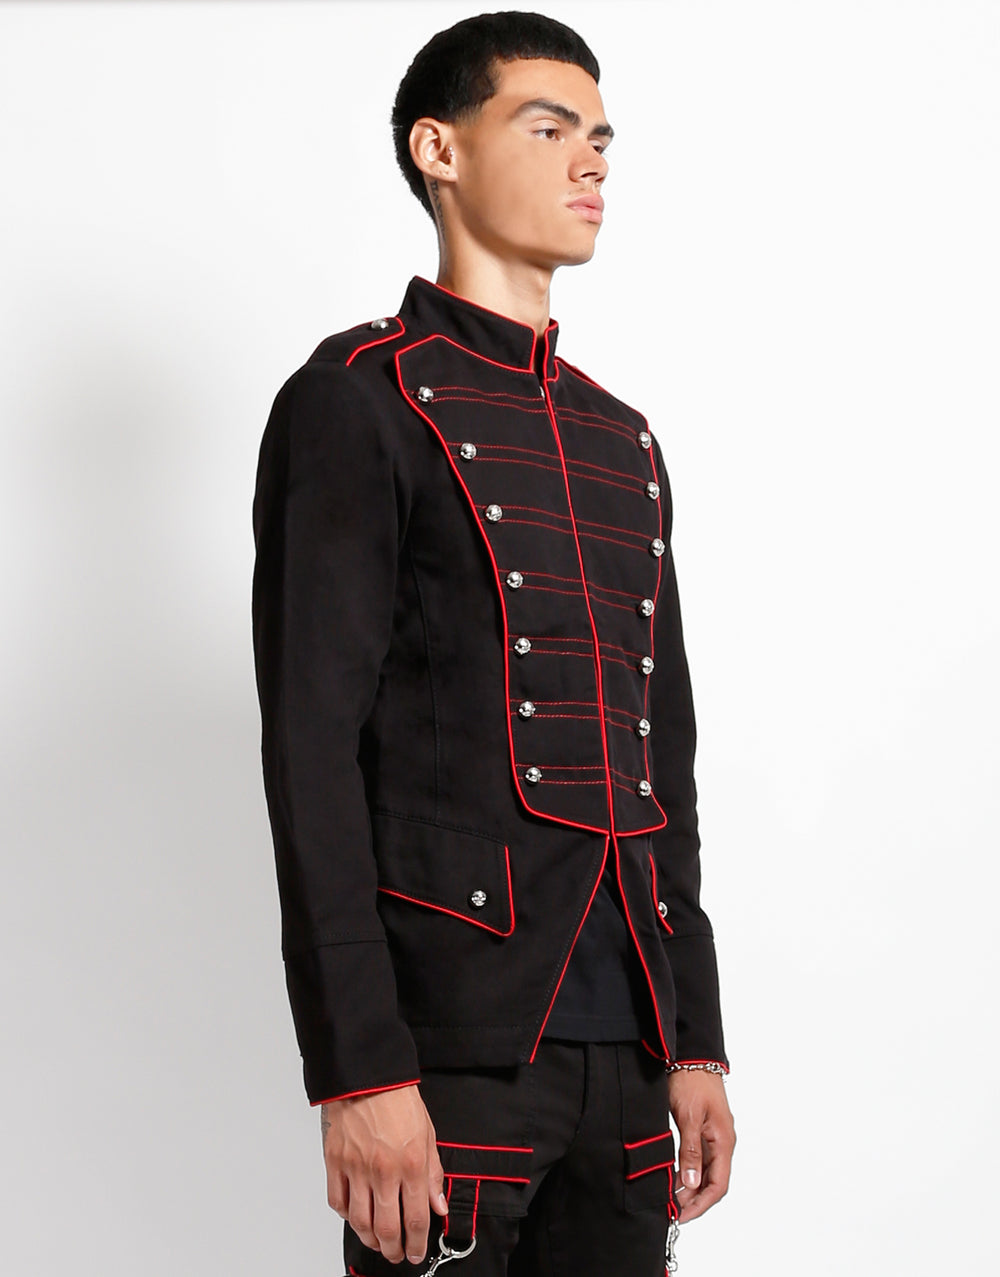 TRIPP NYC - MY BAND JACKET RED